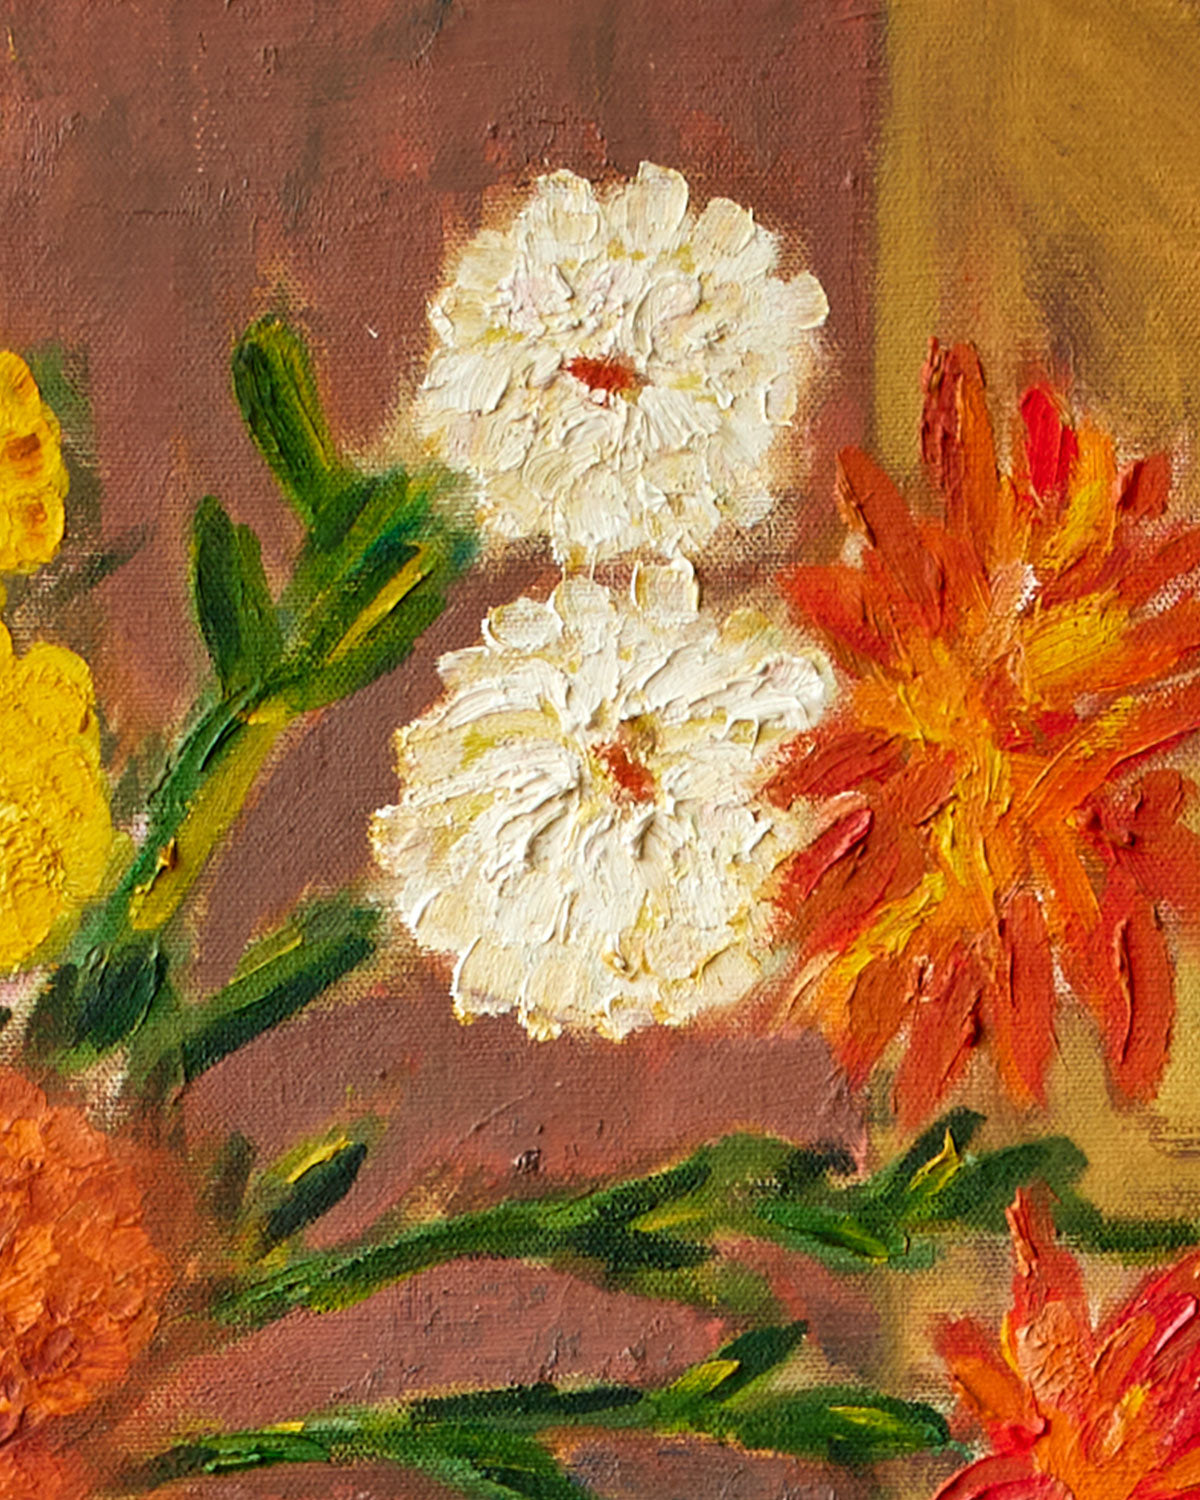 Still Life with Red Flowers